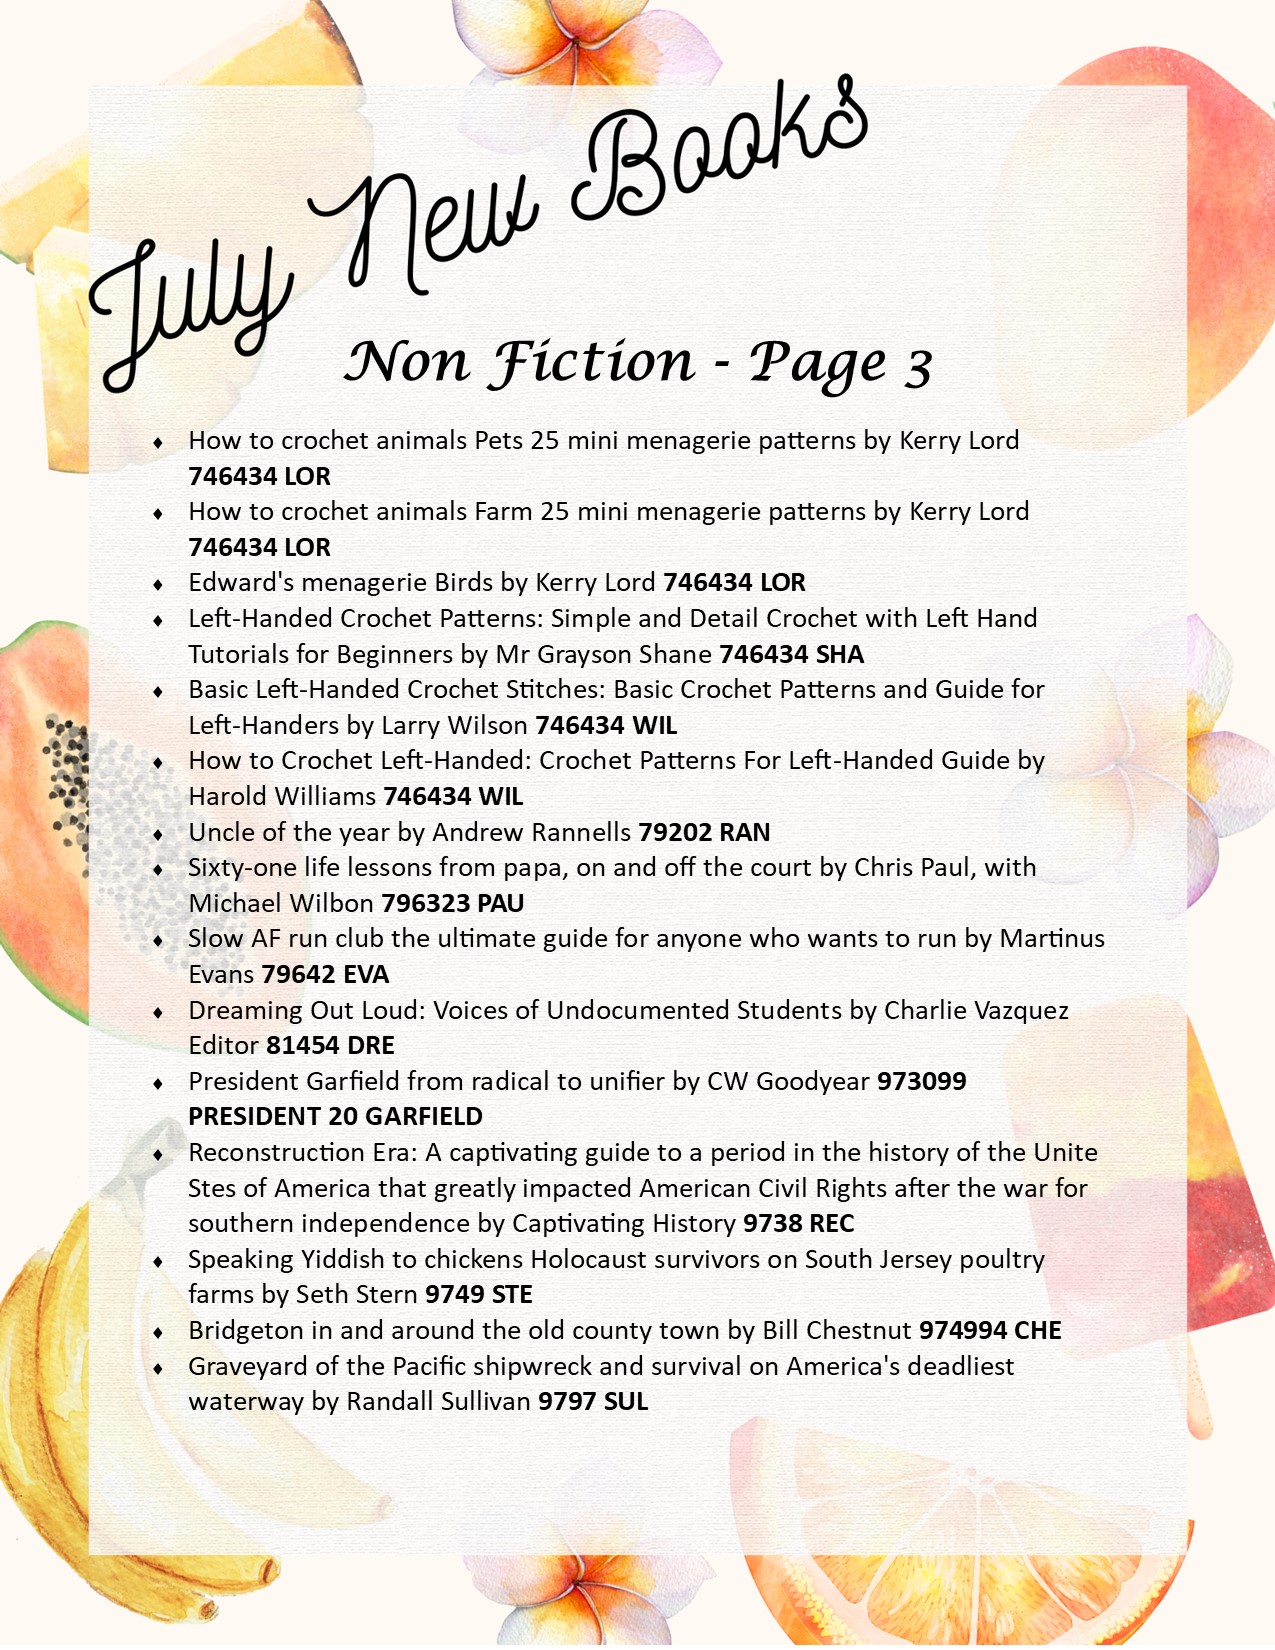 July New Non Fiction PG 3